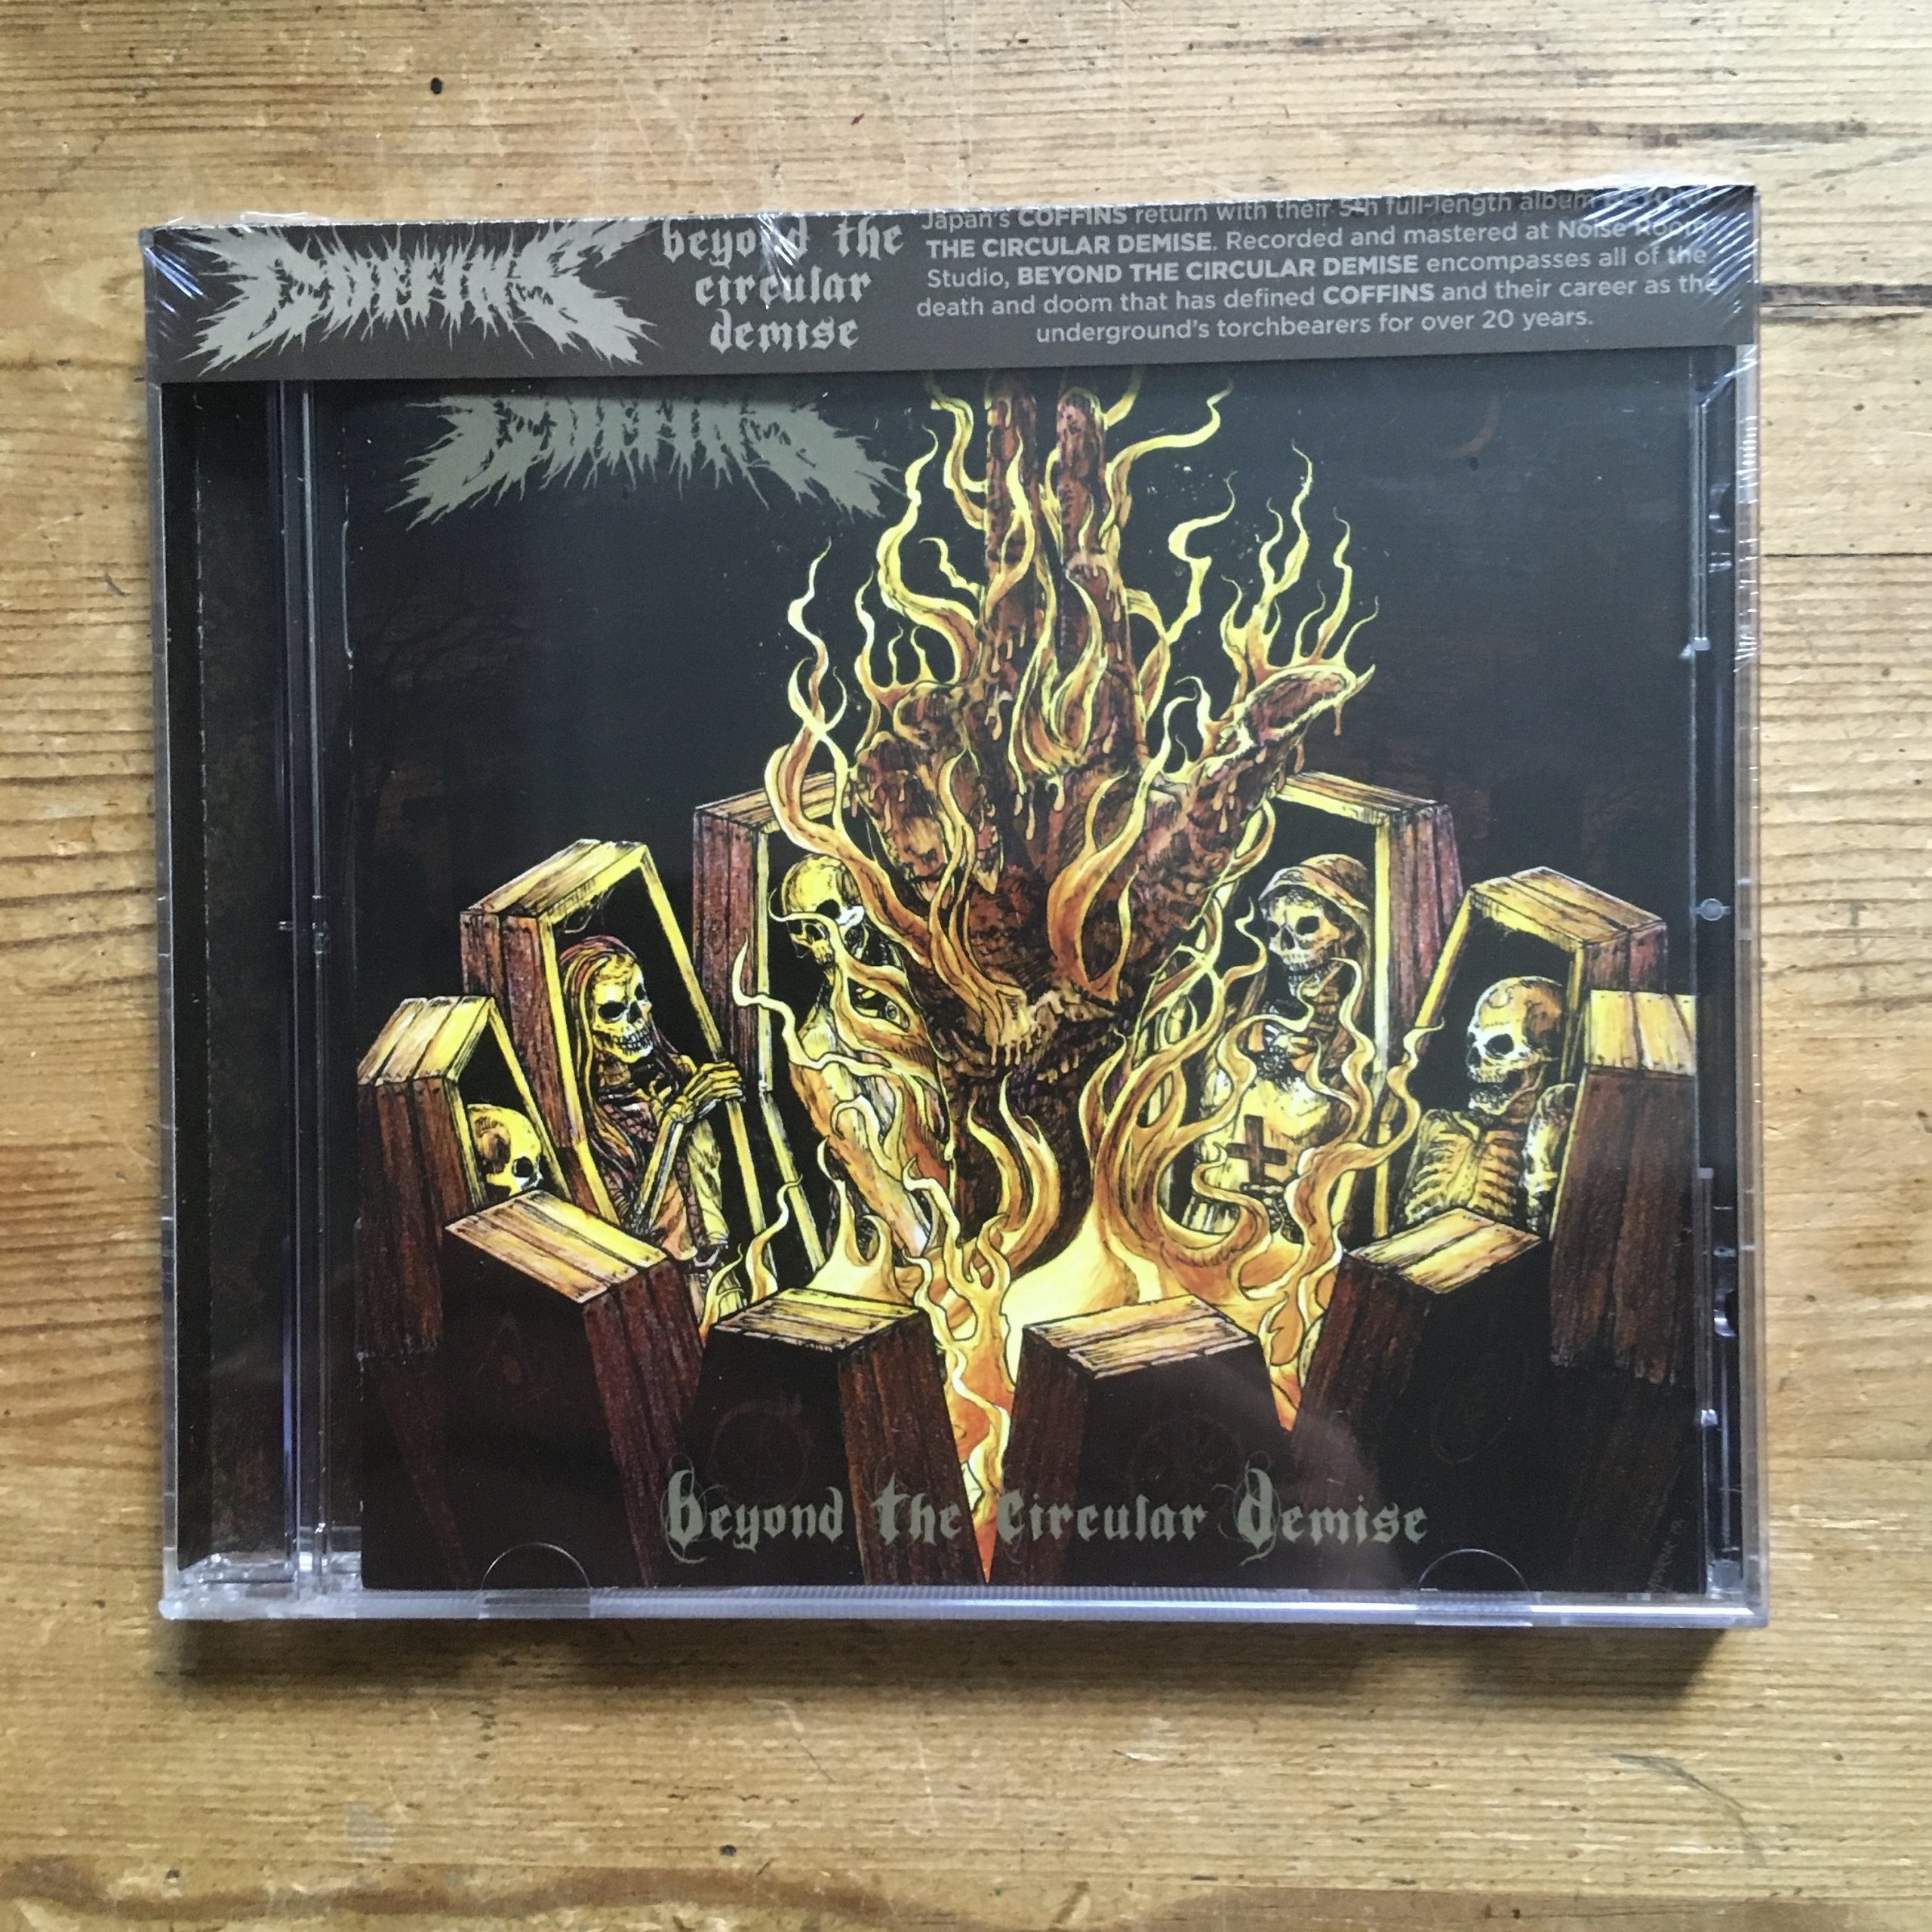 Photo of the Coffins - "Beyond the Circular Demise" CD